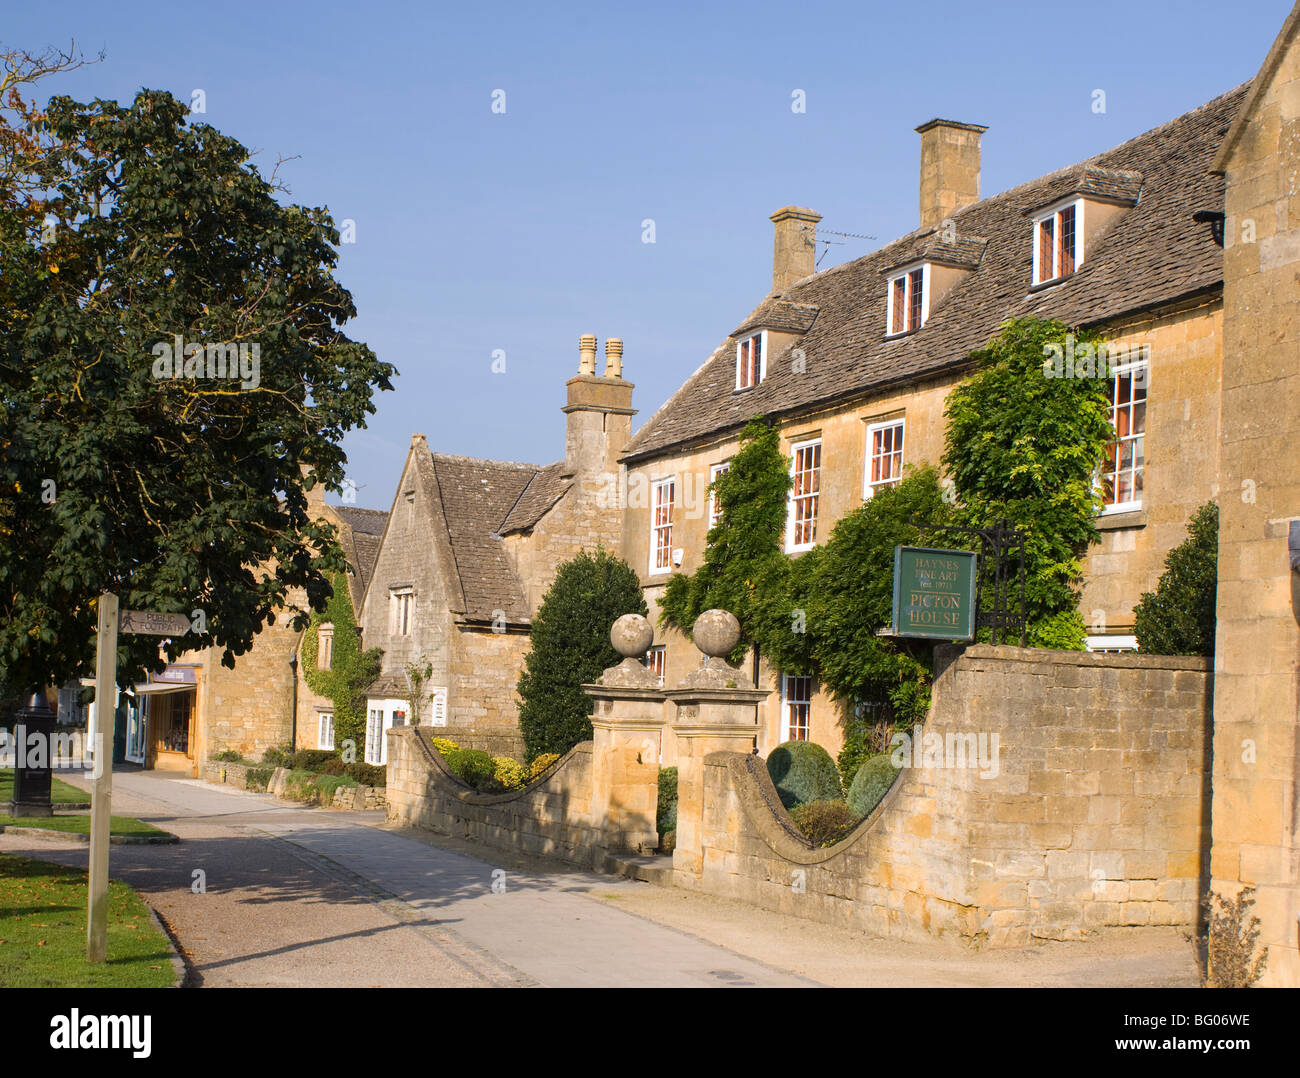 Cotswold stone houses in the town of Broadway, Worcestershire, The Cotswolds, England, United Kingdom, Europe Stock Photo